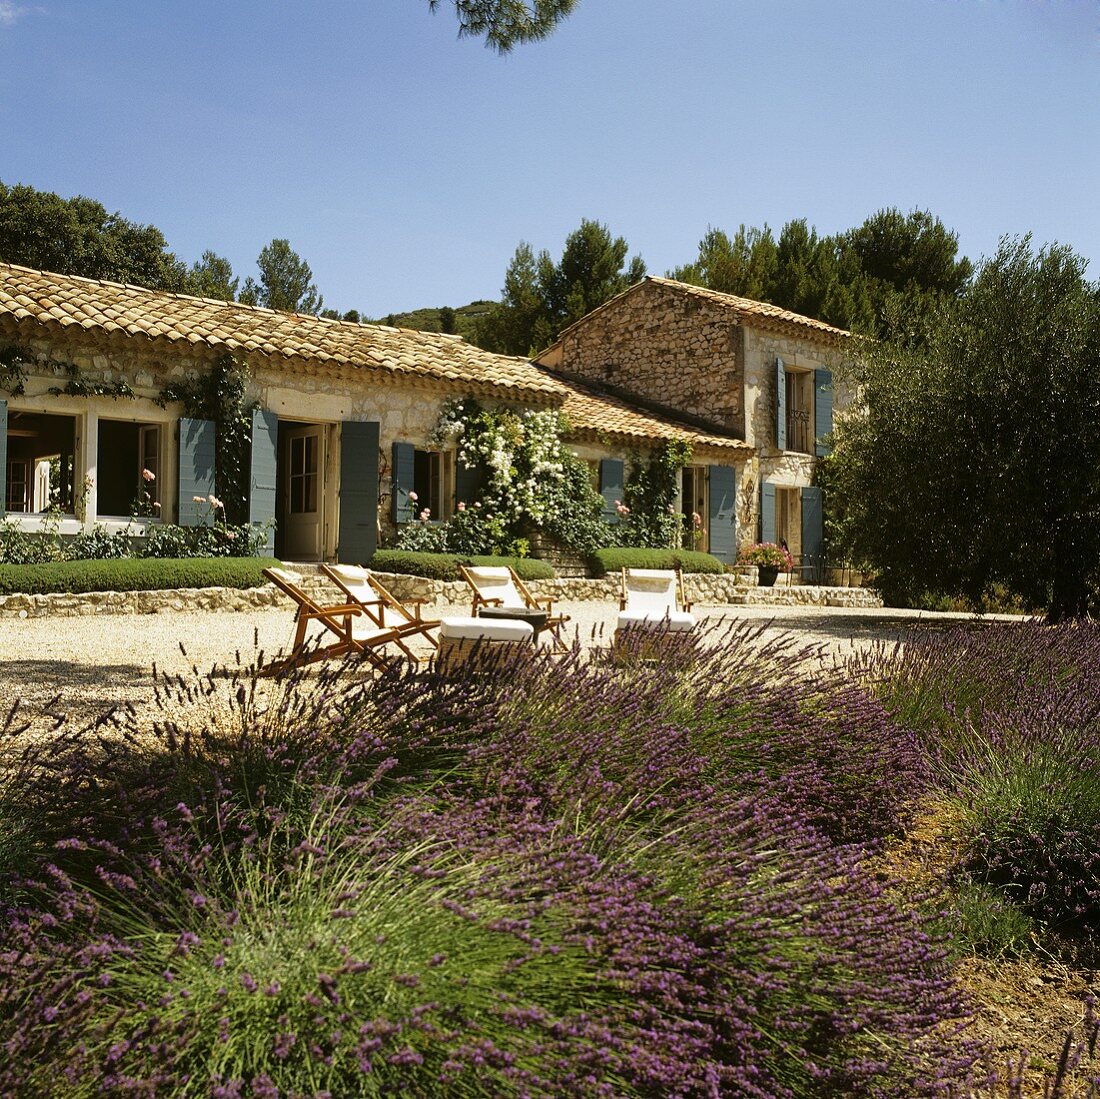 Blooming lavender bushes on the edge of a terrace of a Mediterranean country house